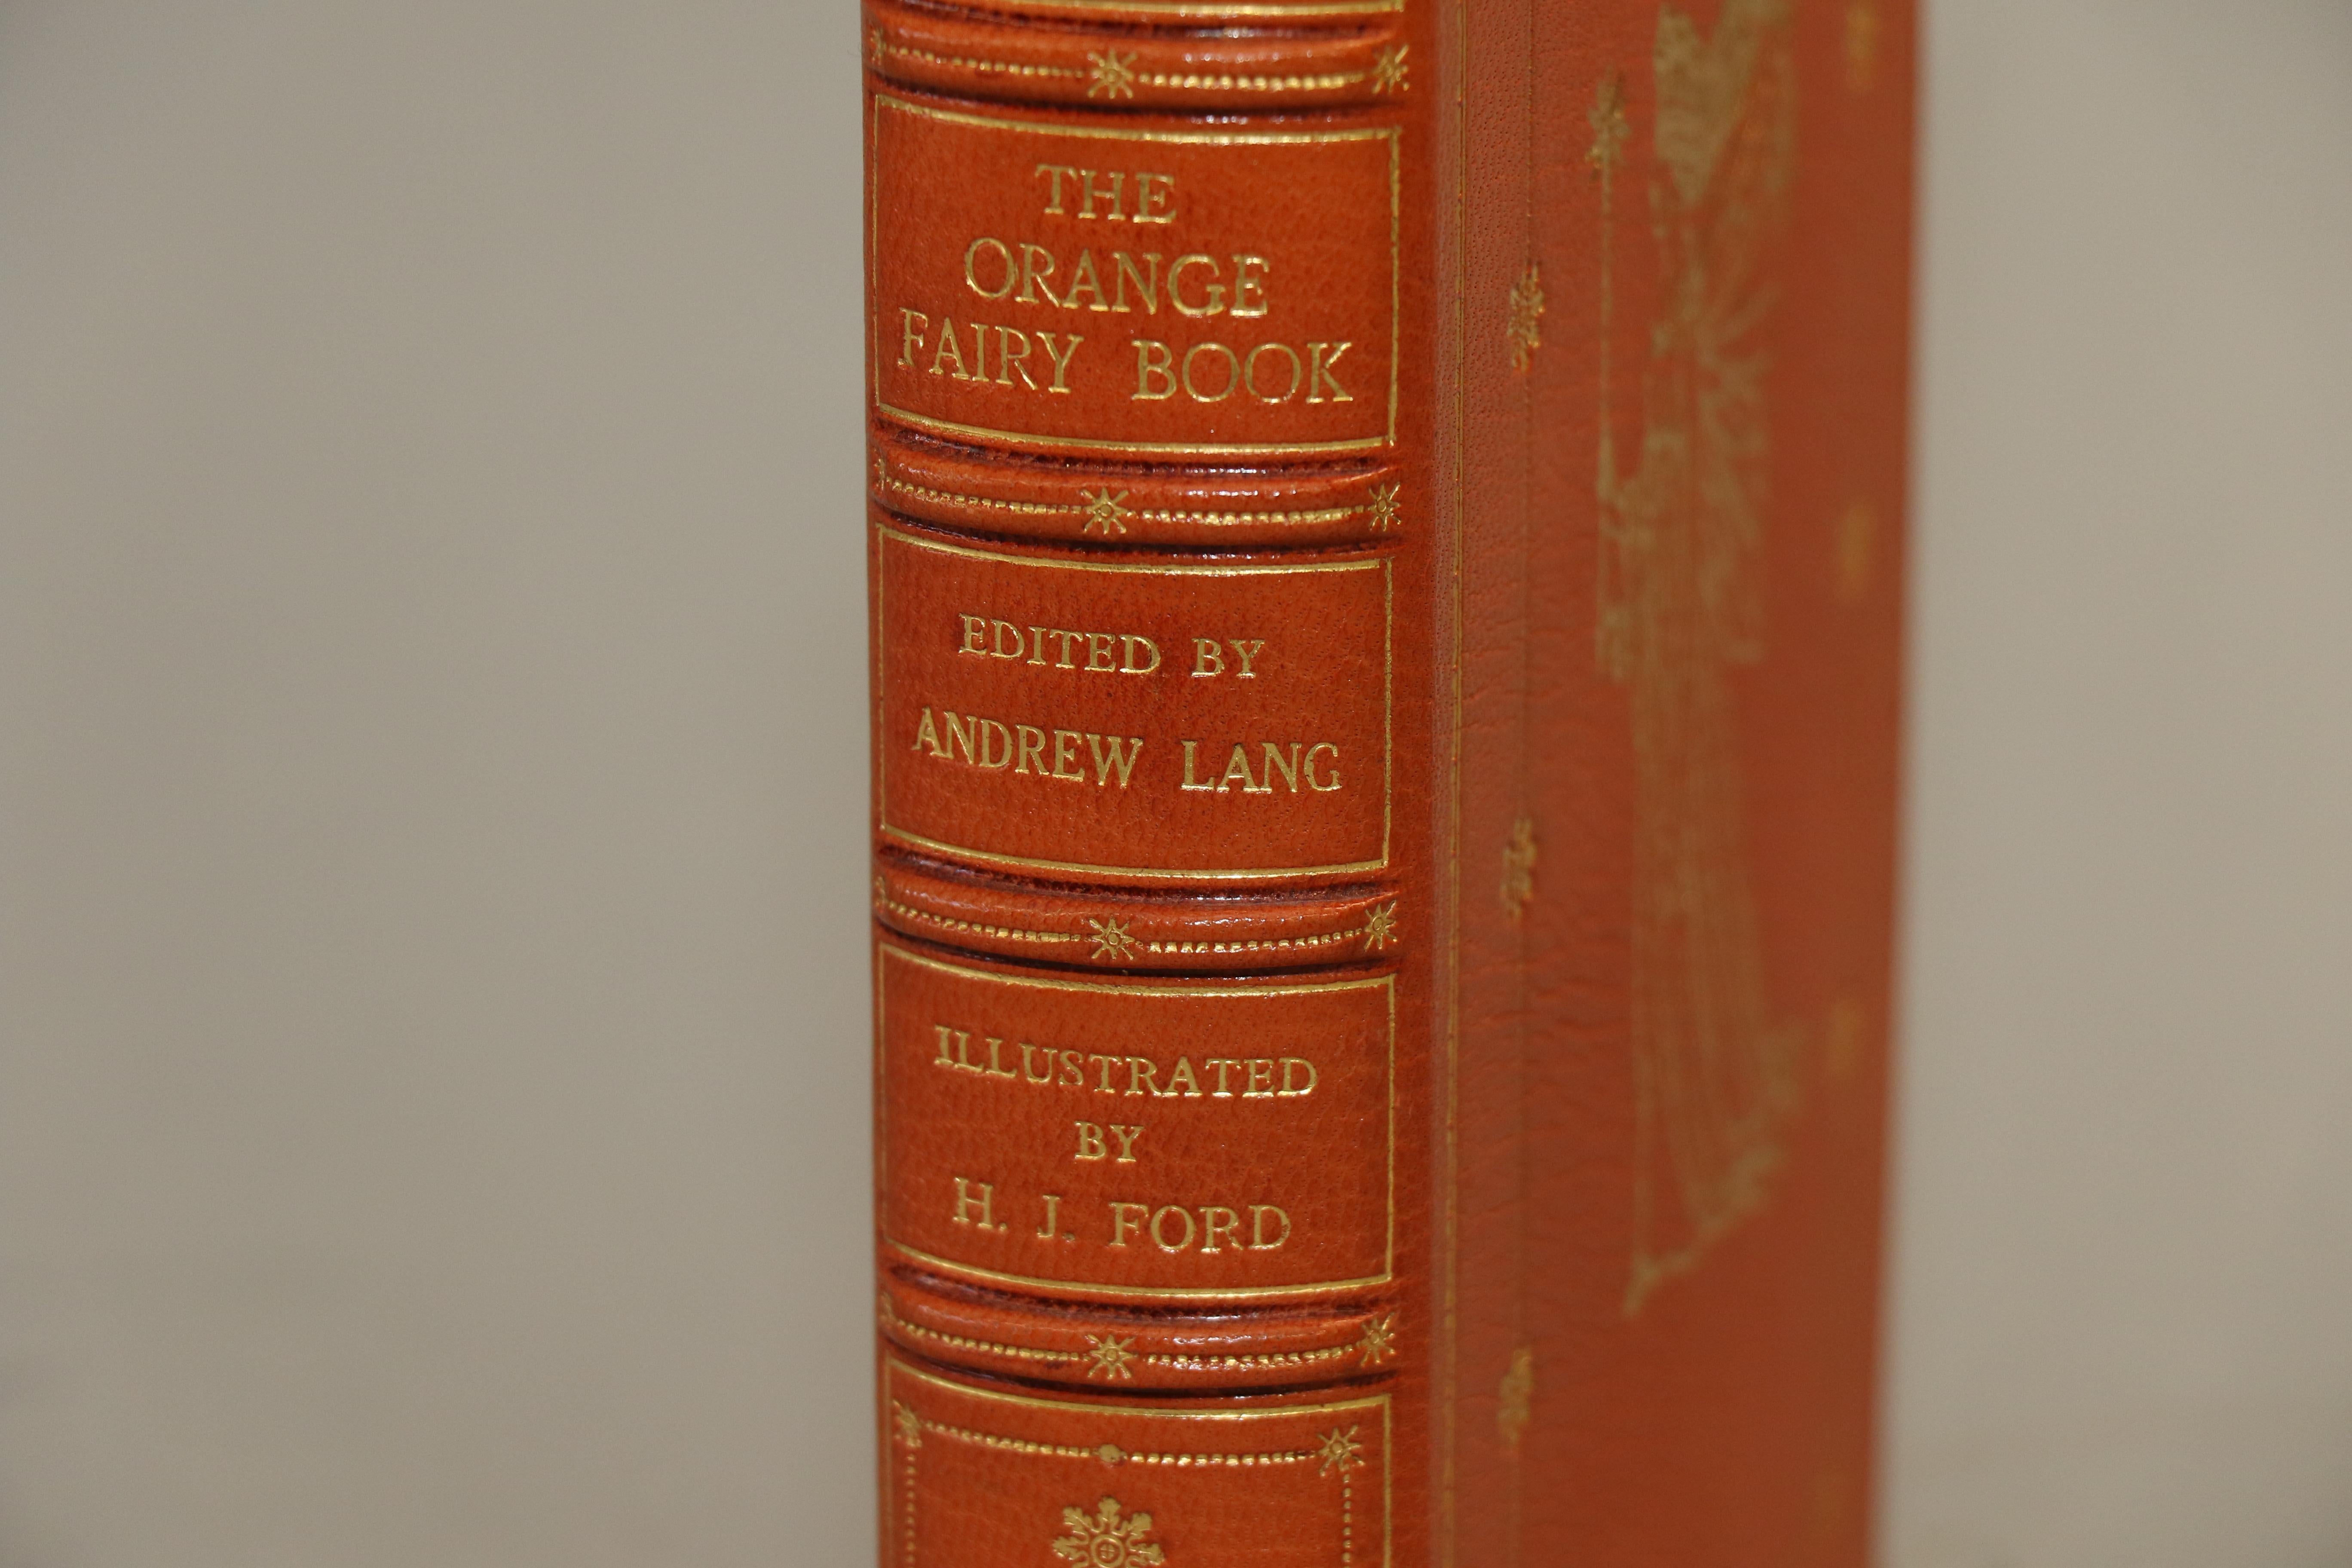 First Edition. Leather bound. One volume. Recent bound in full orange morocco by Aspreys with all edges gilt, raised bands, and ornate gilt on spine and covers. Very good. Published in London by Longmans, Green, and Co. in 1906.

Children's